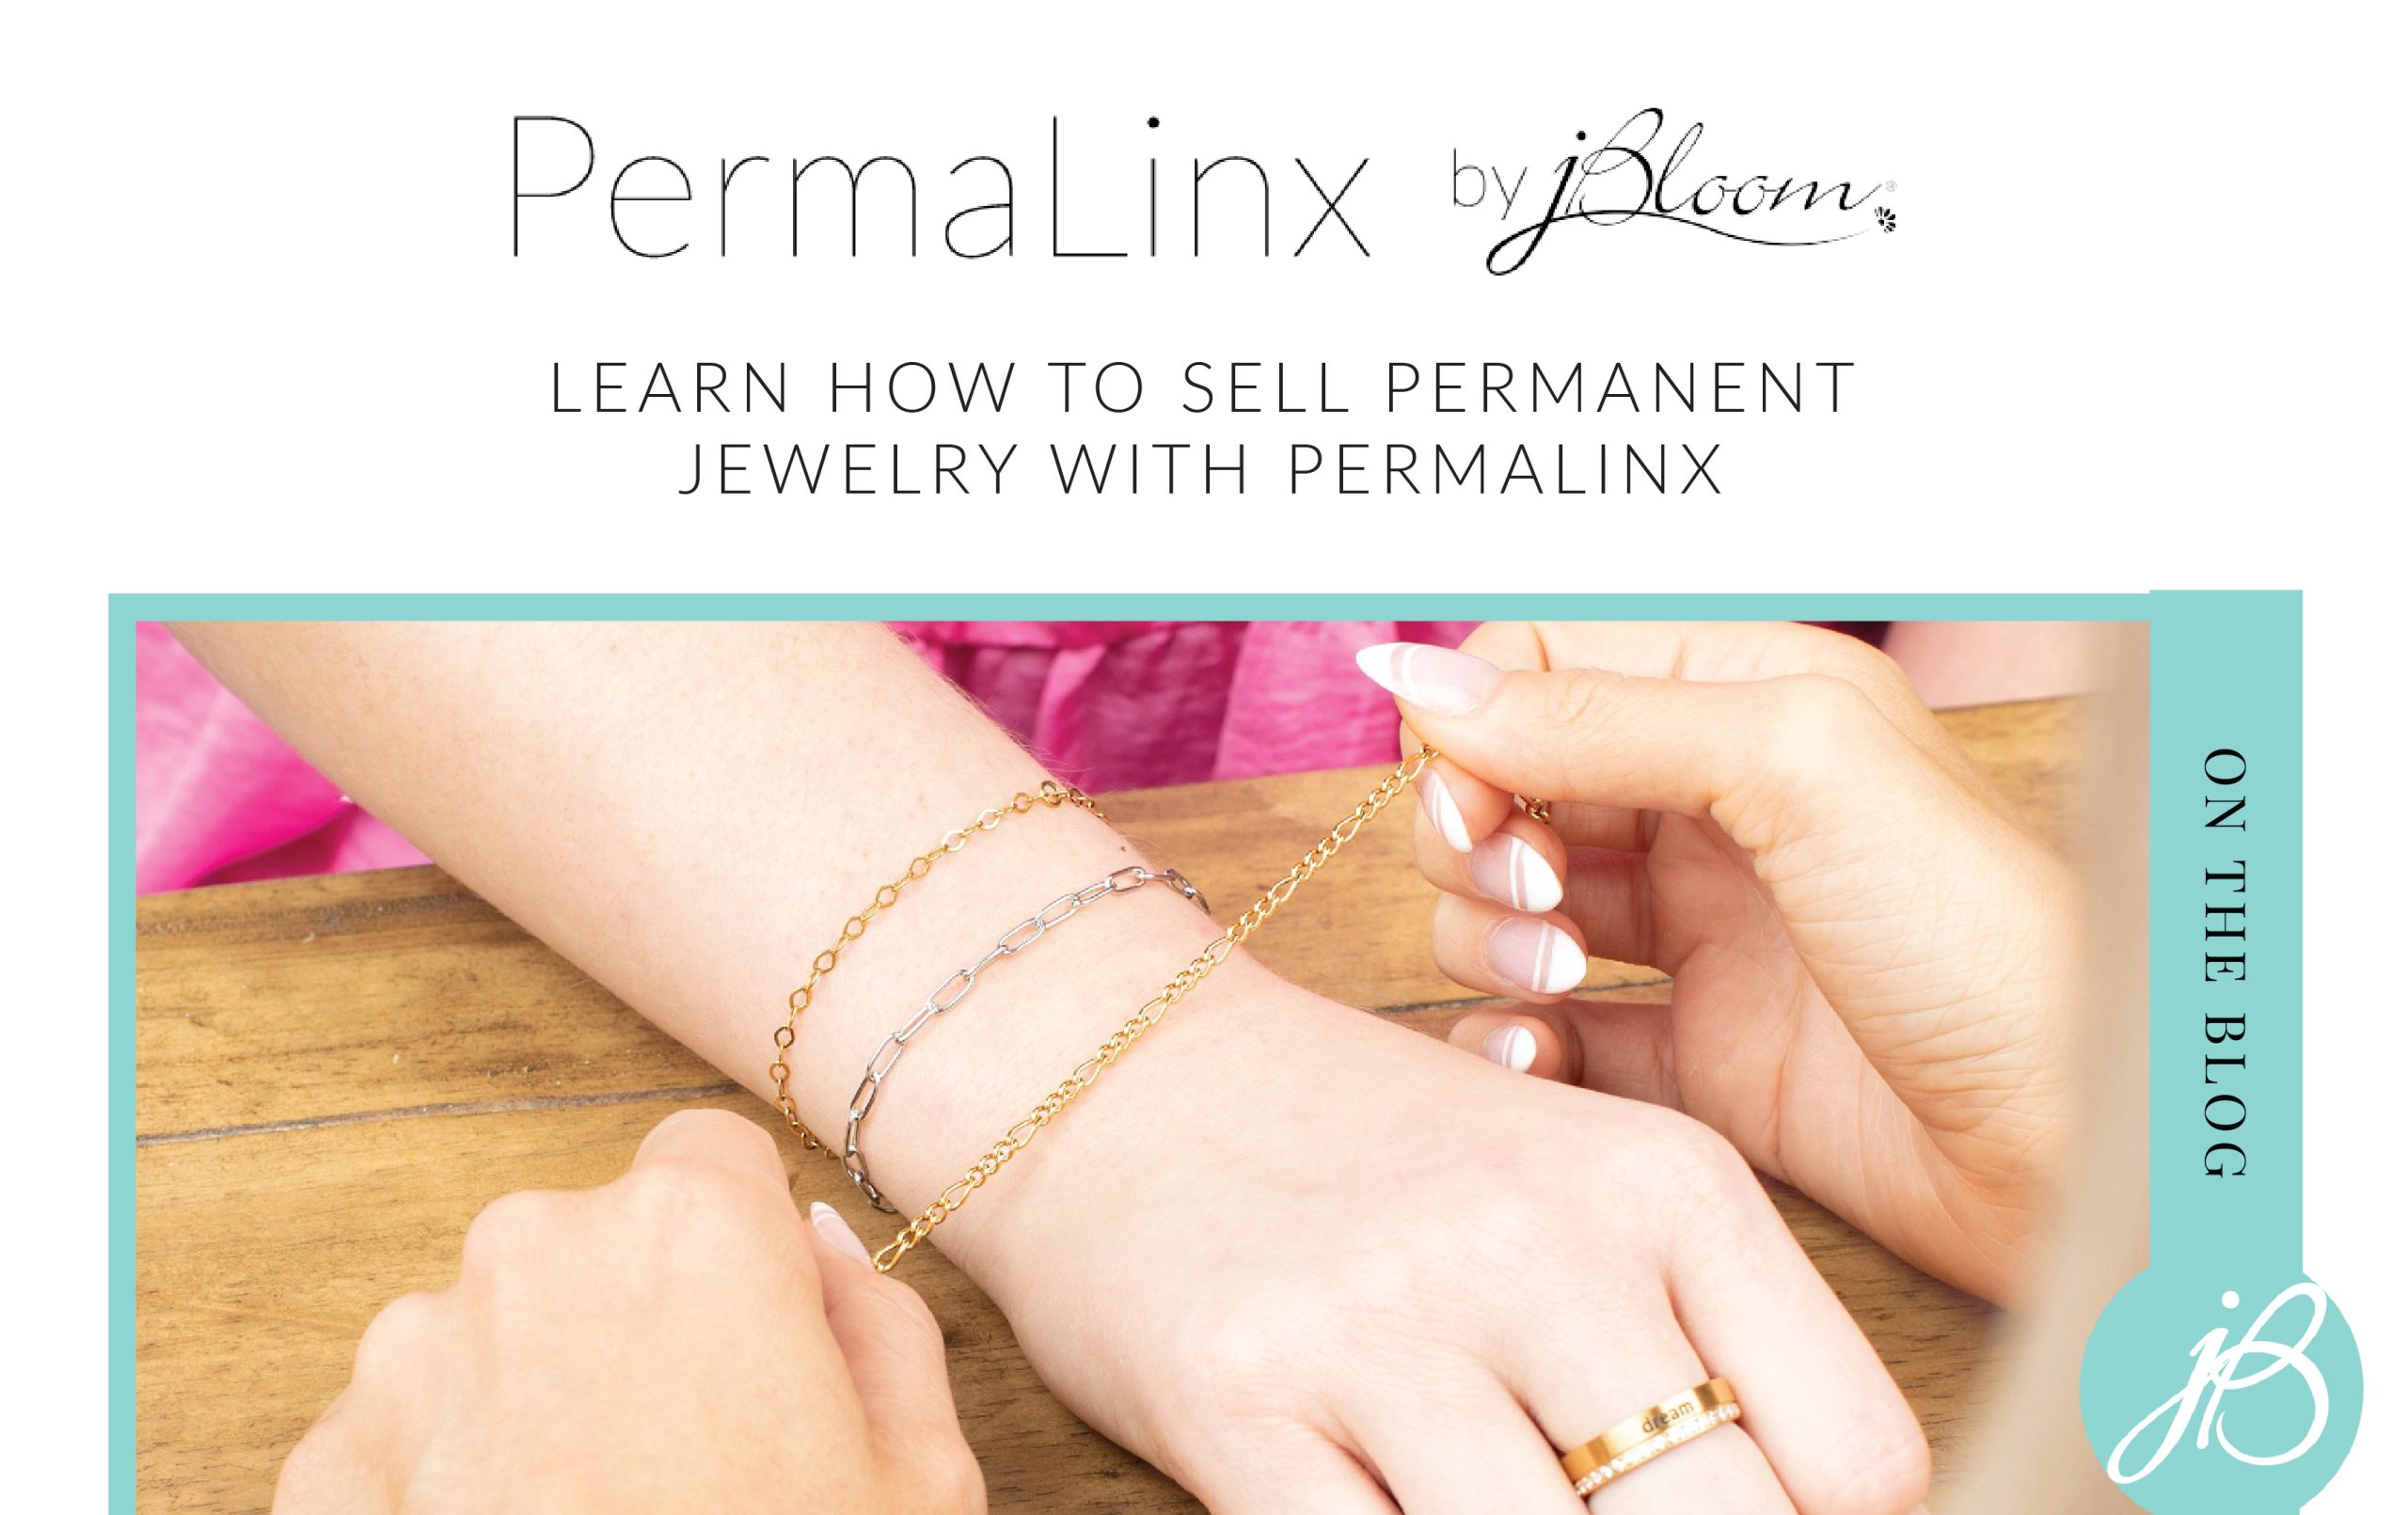 Learn How to Sell Permanent Jewelry with PermaLinx